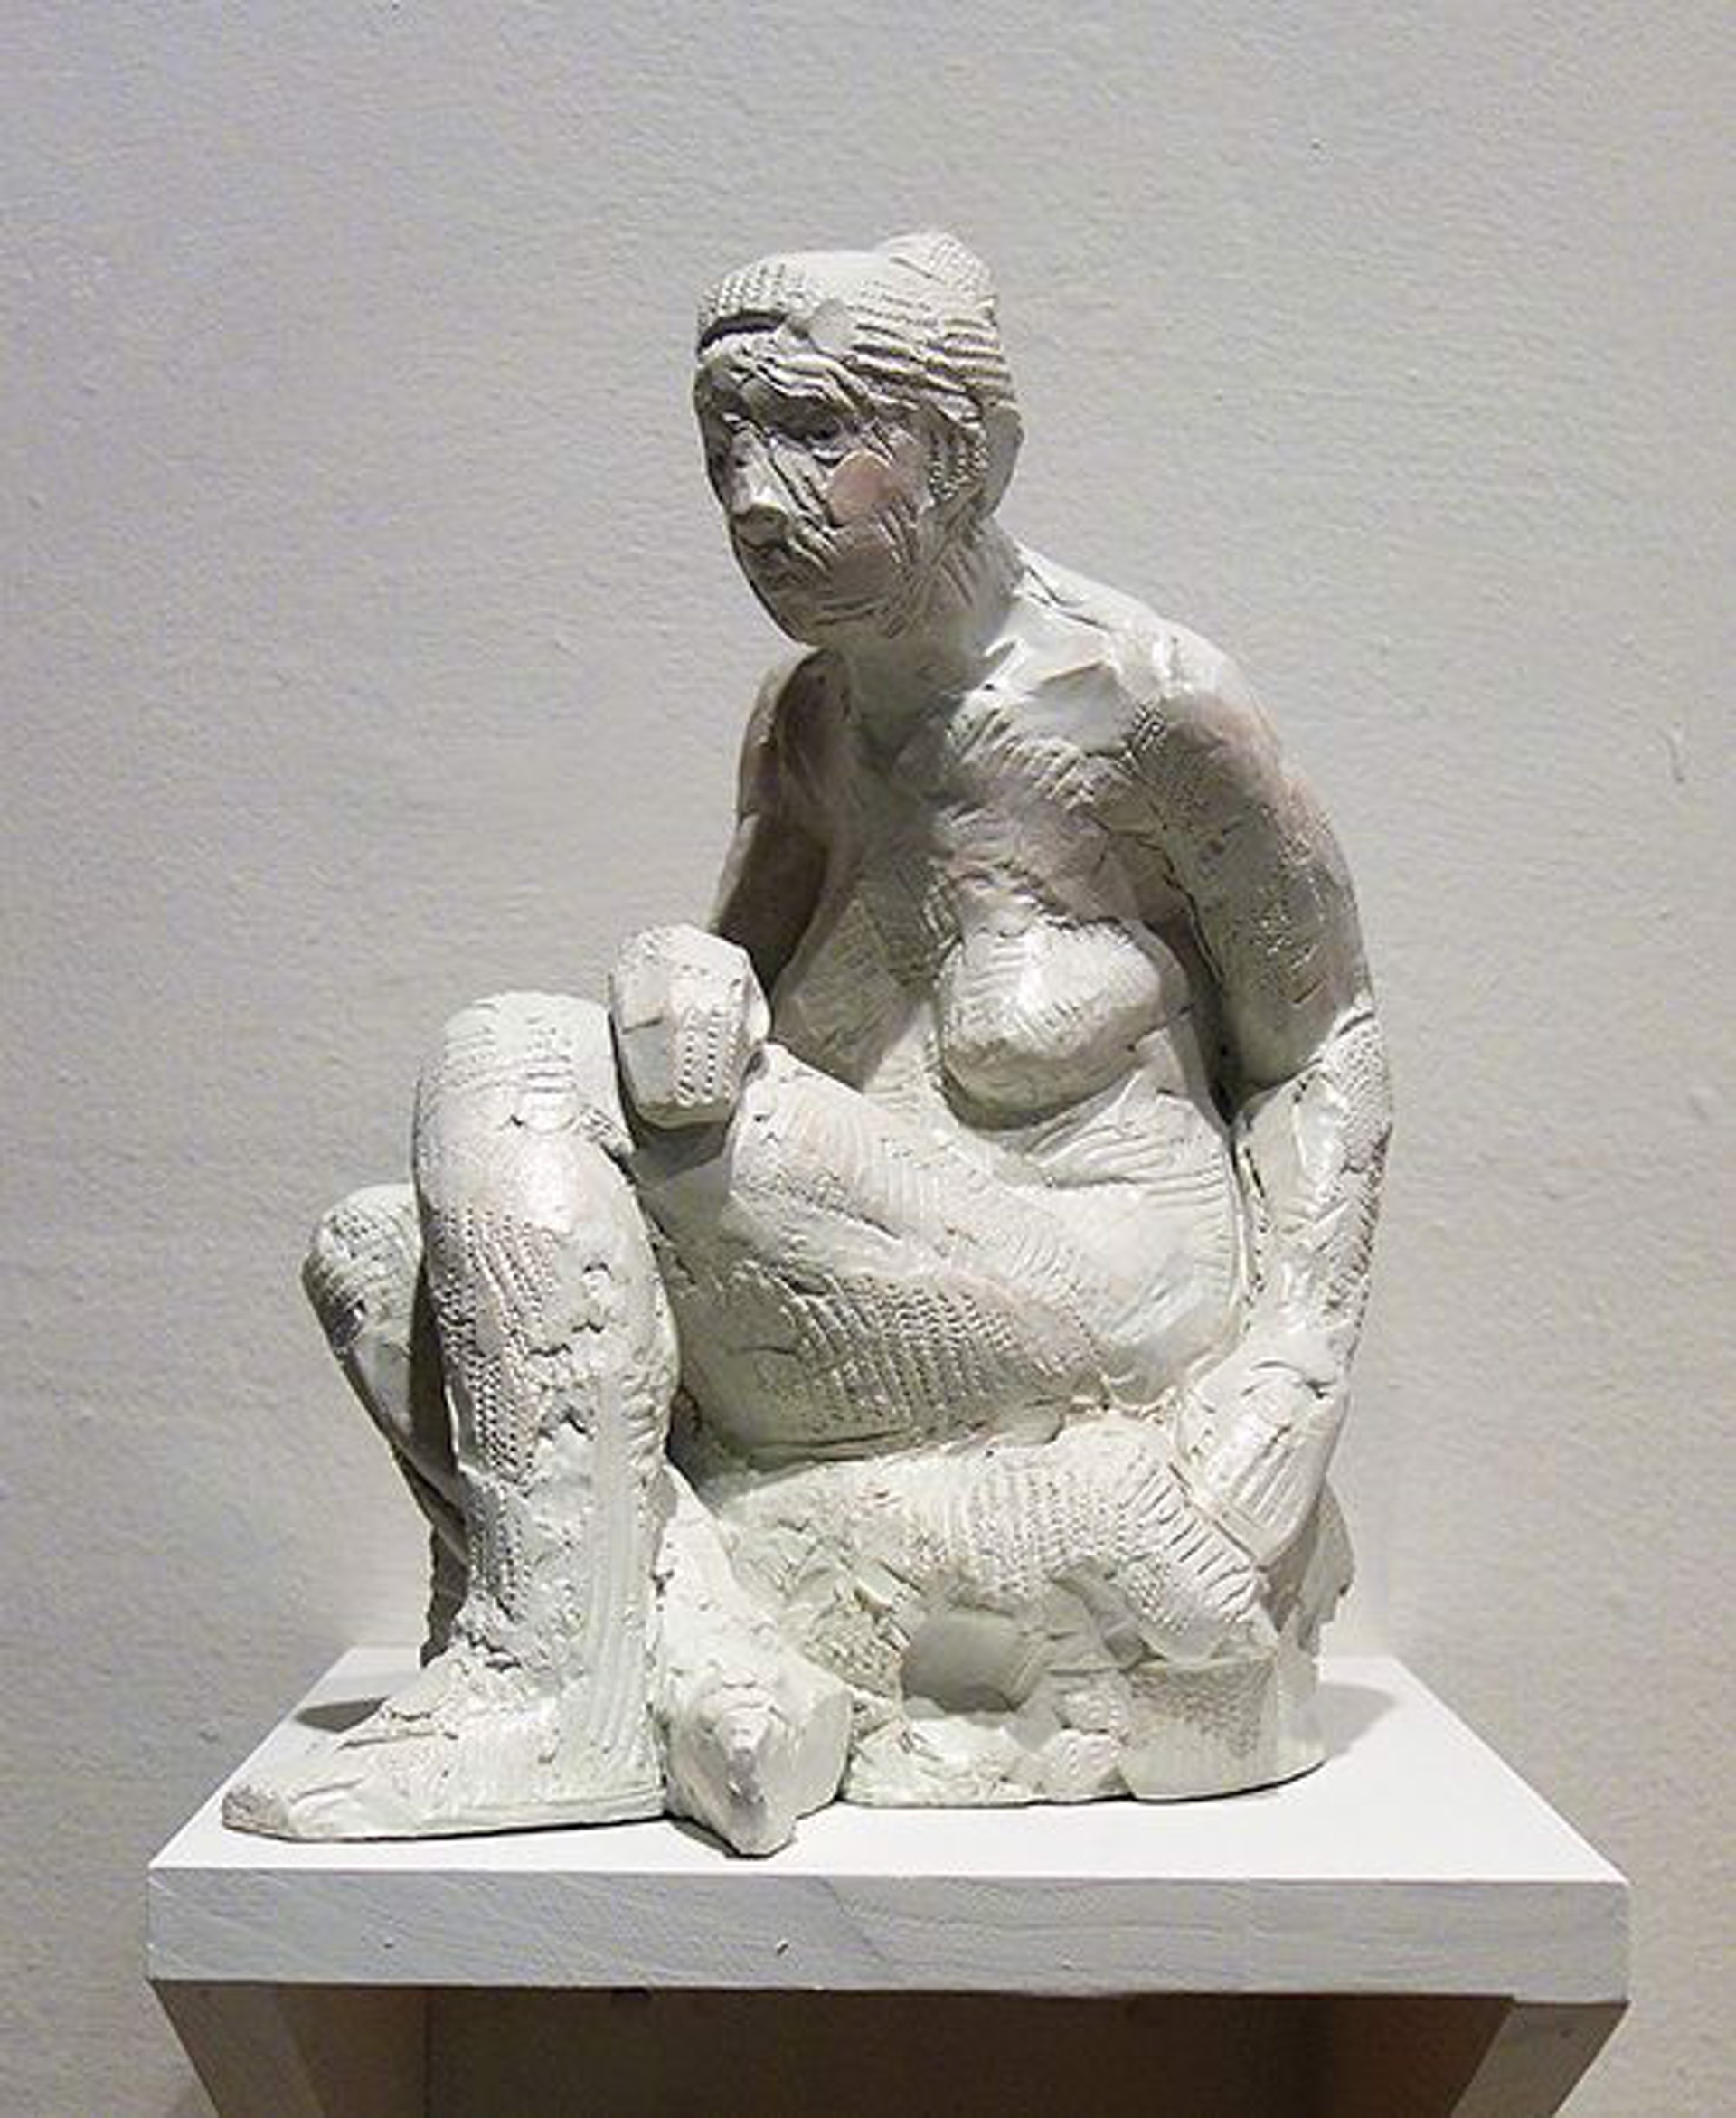 Seated Female by Michael O'Keefe